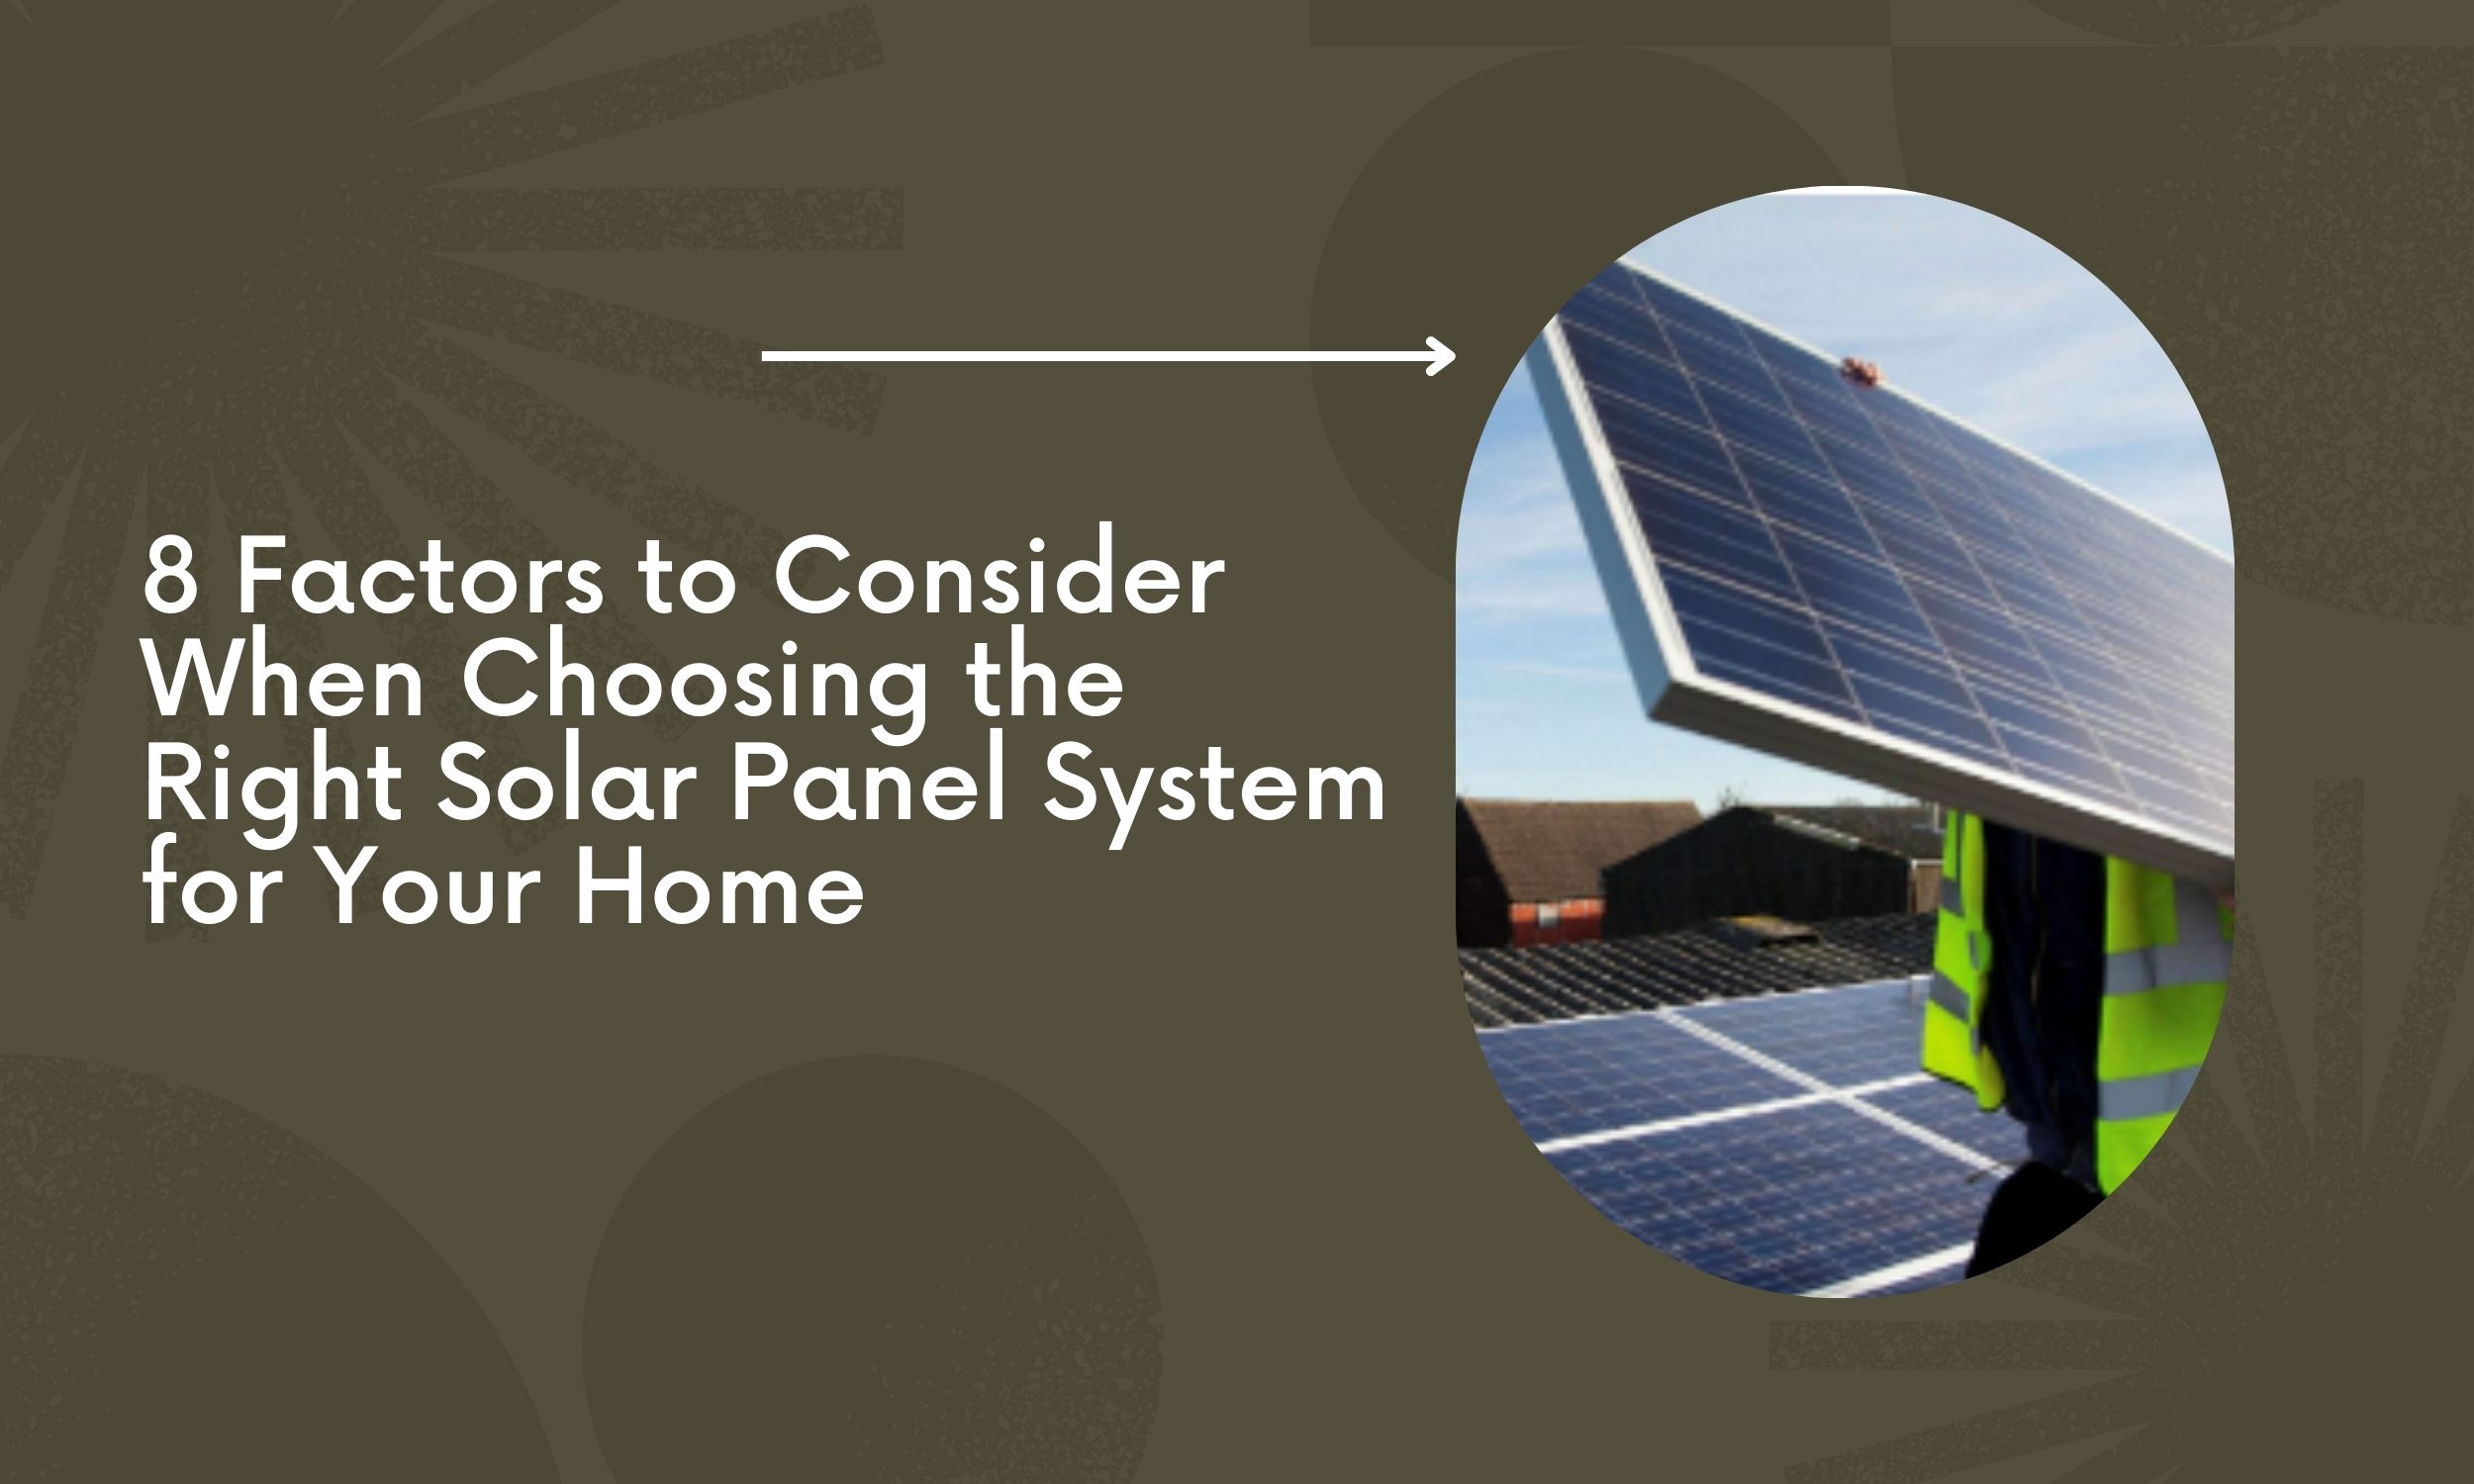 8 Factors to Consider When Choosing the Right Solar Panel System for Your Home